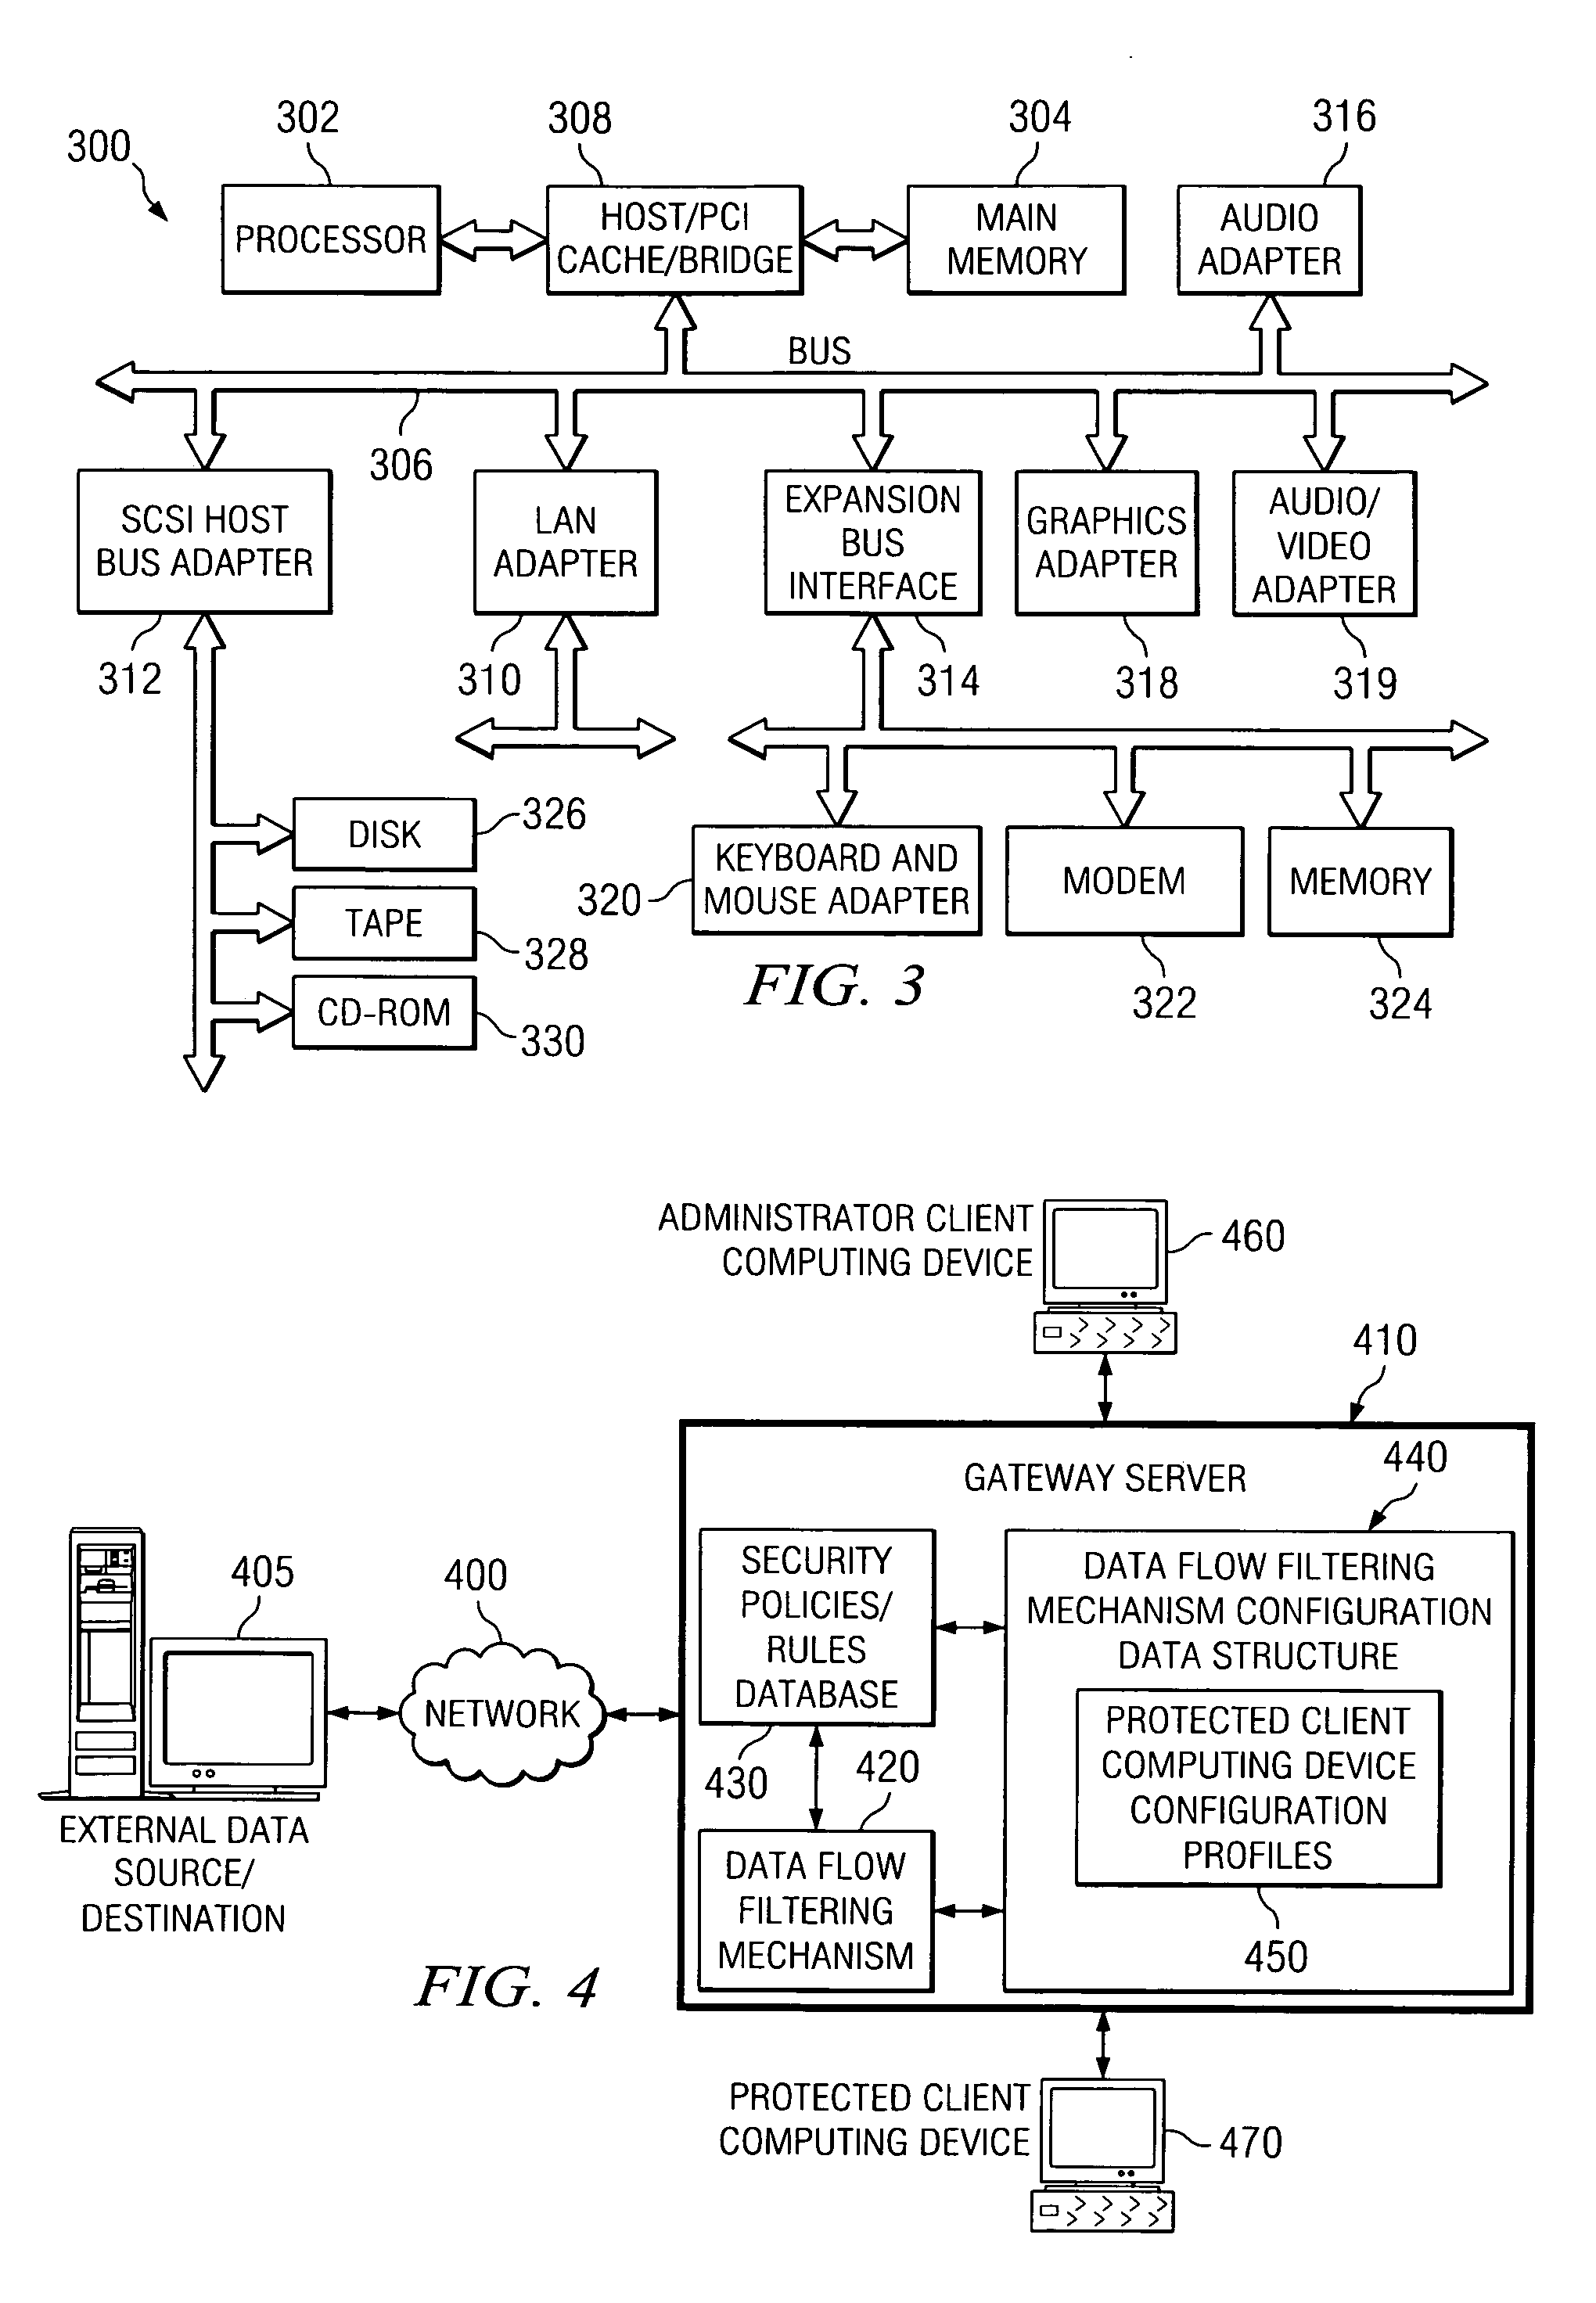 System and method for on-demand dynamic control of security policies/rules by a client computing device